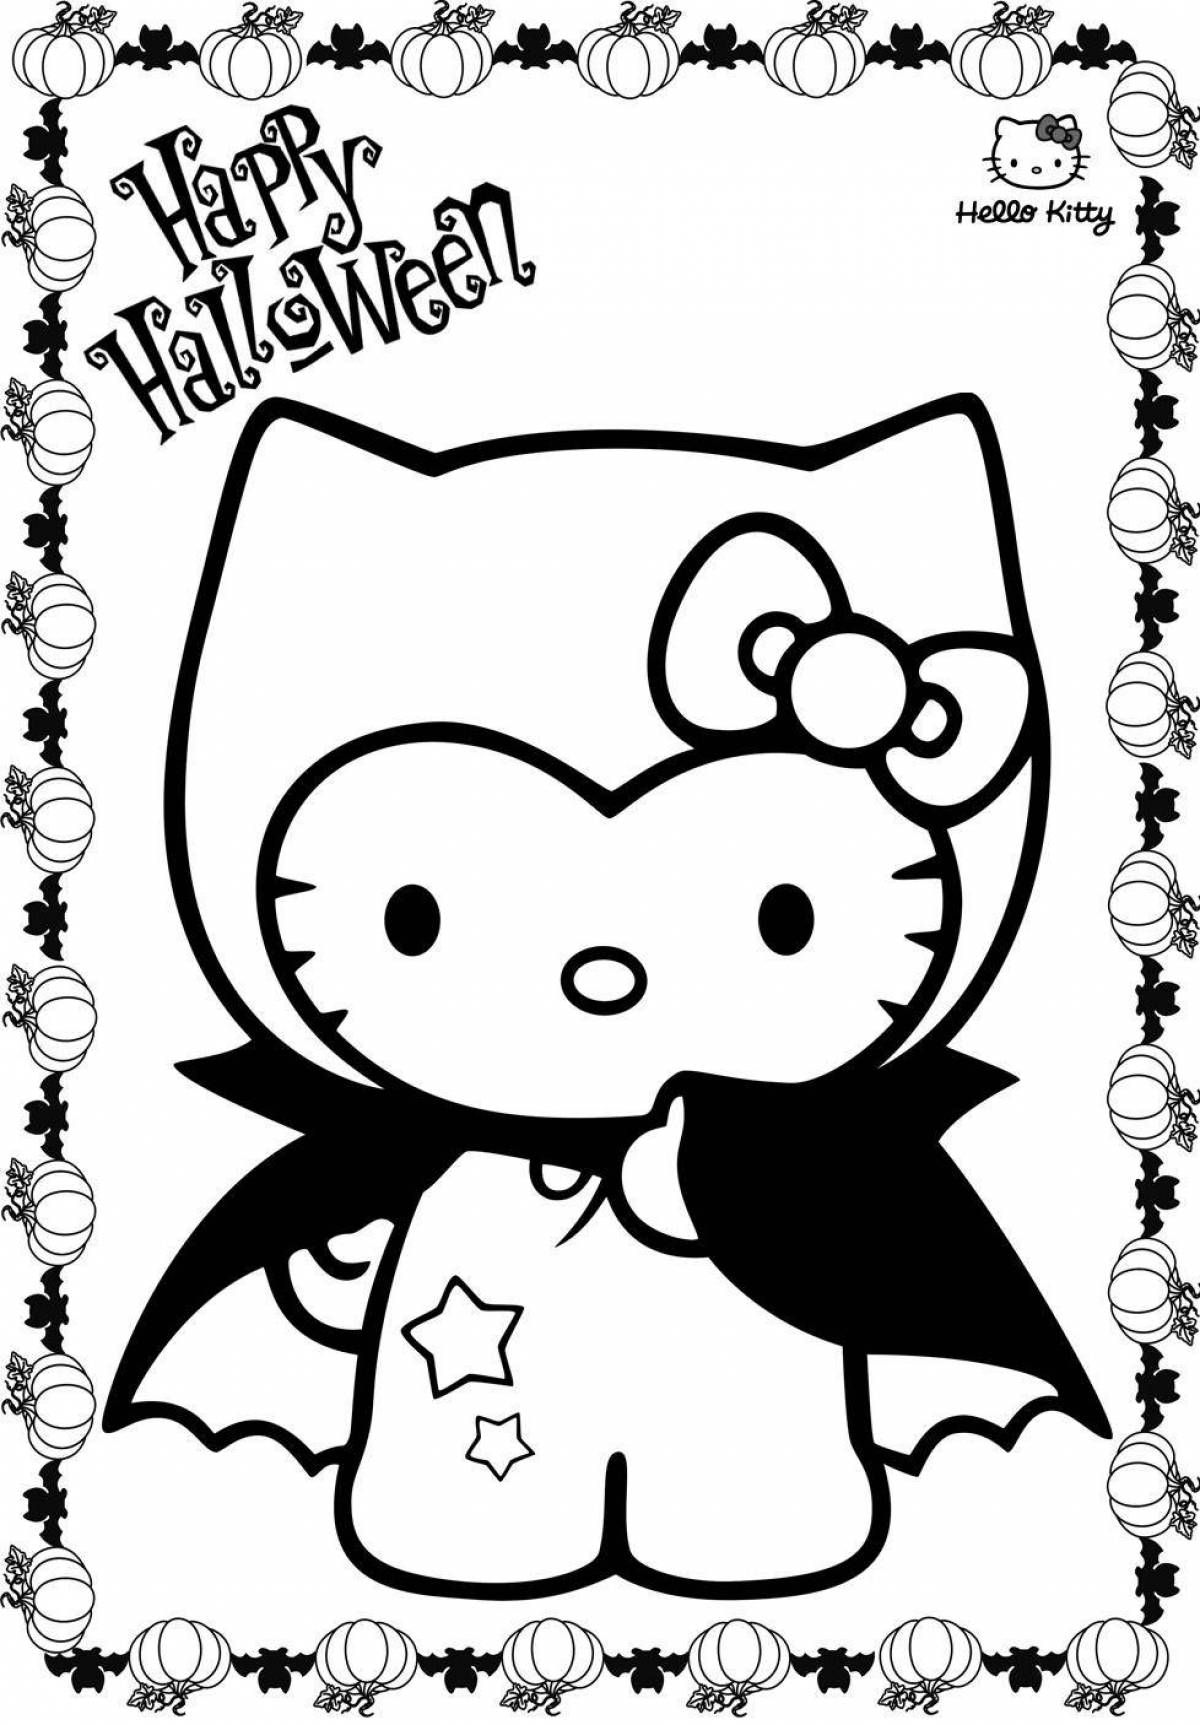 Glorious hello kitty demon coloring page